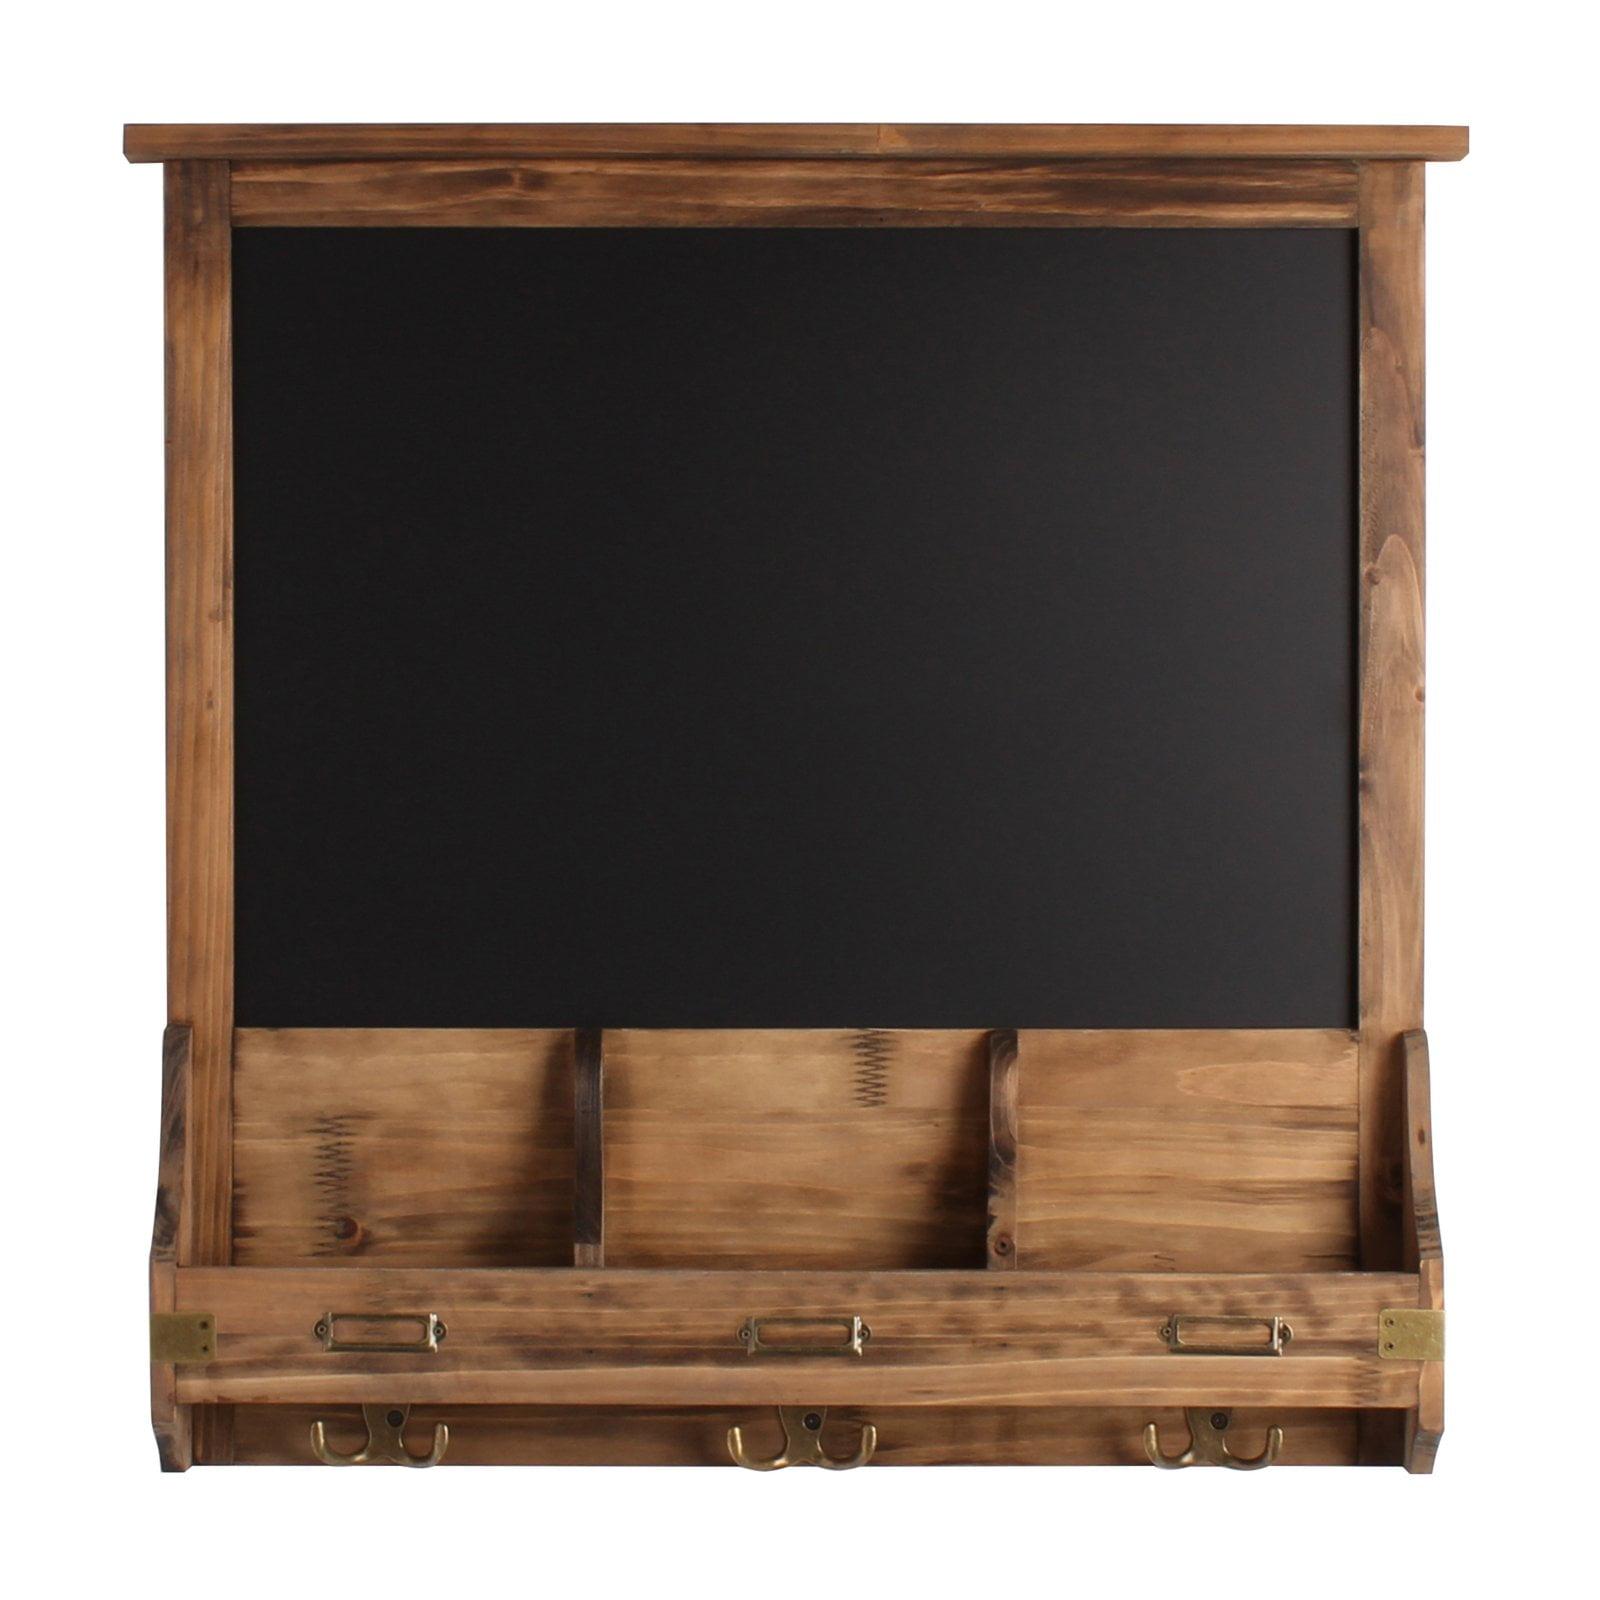 Rustic Brown Wood Wall Organizer with Chalkboard and Hooks